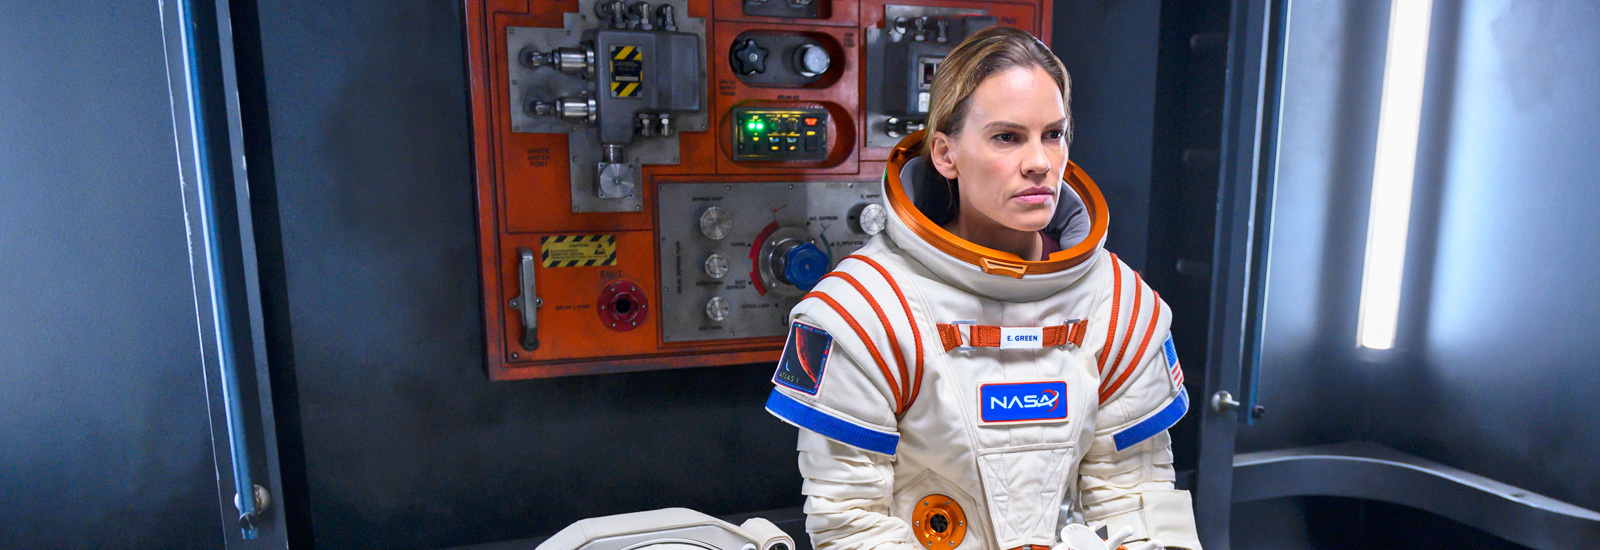 The Streaming Era’s Recent Astronaut-Themed TV Shows, Ranked